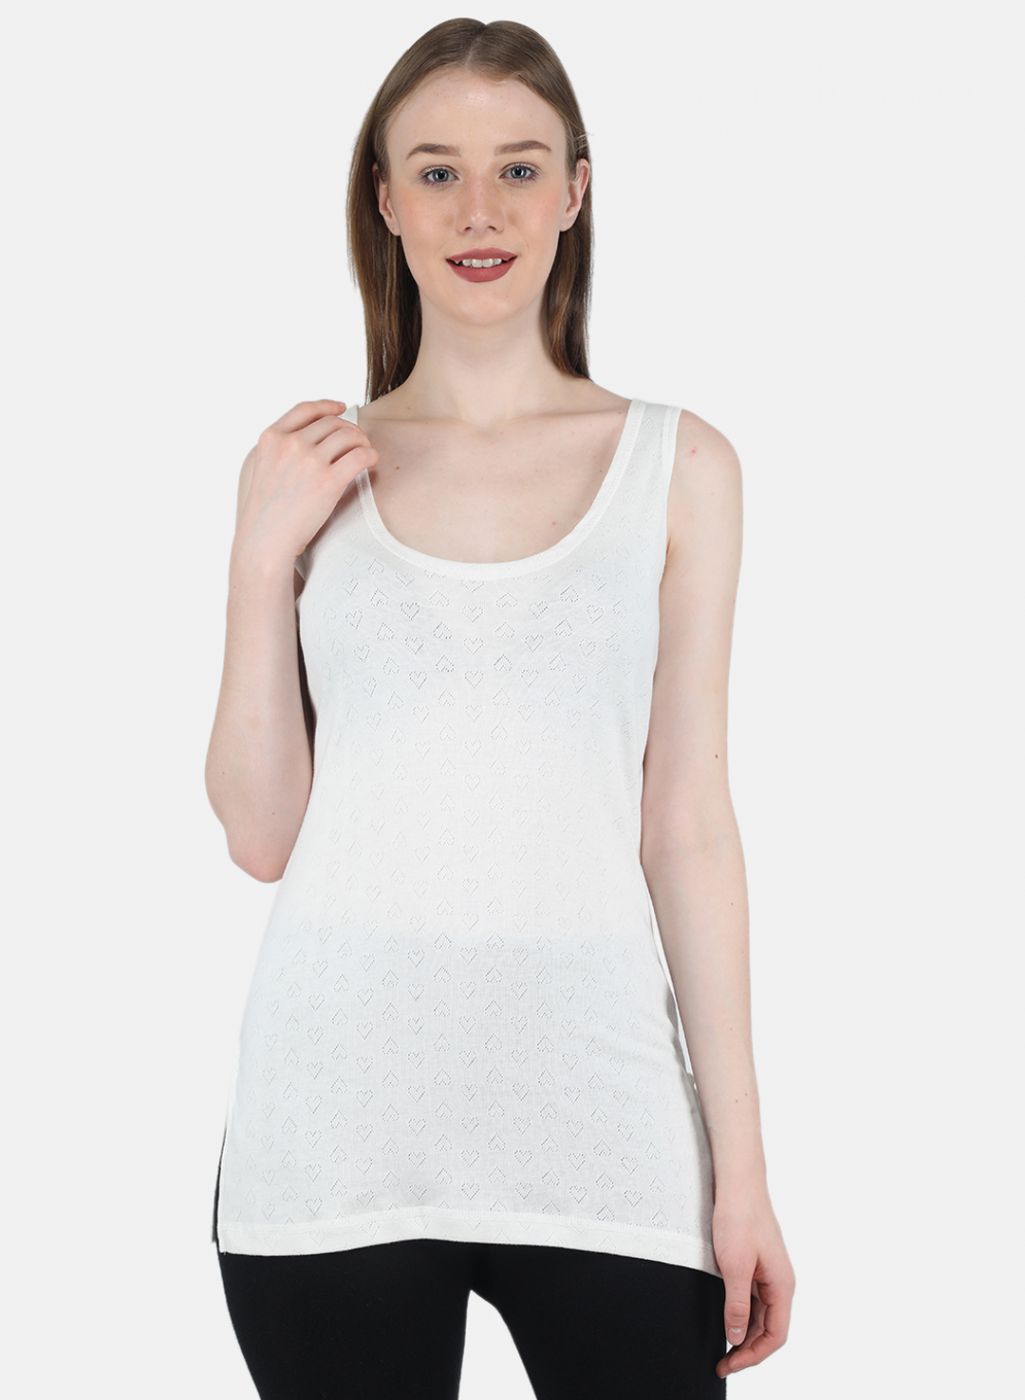 Thermal Camisole Tops - Buy Women's thermal camisole tops online